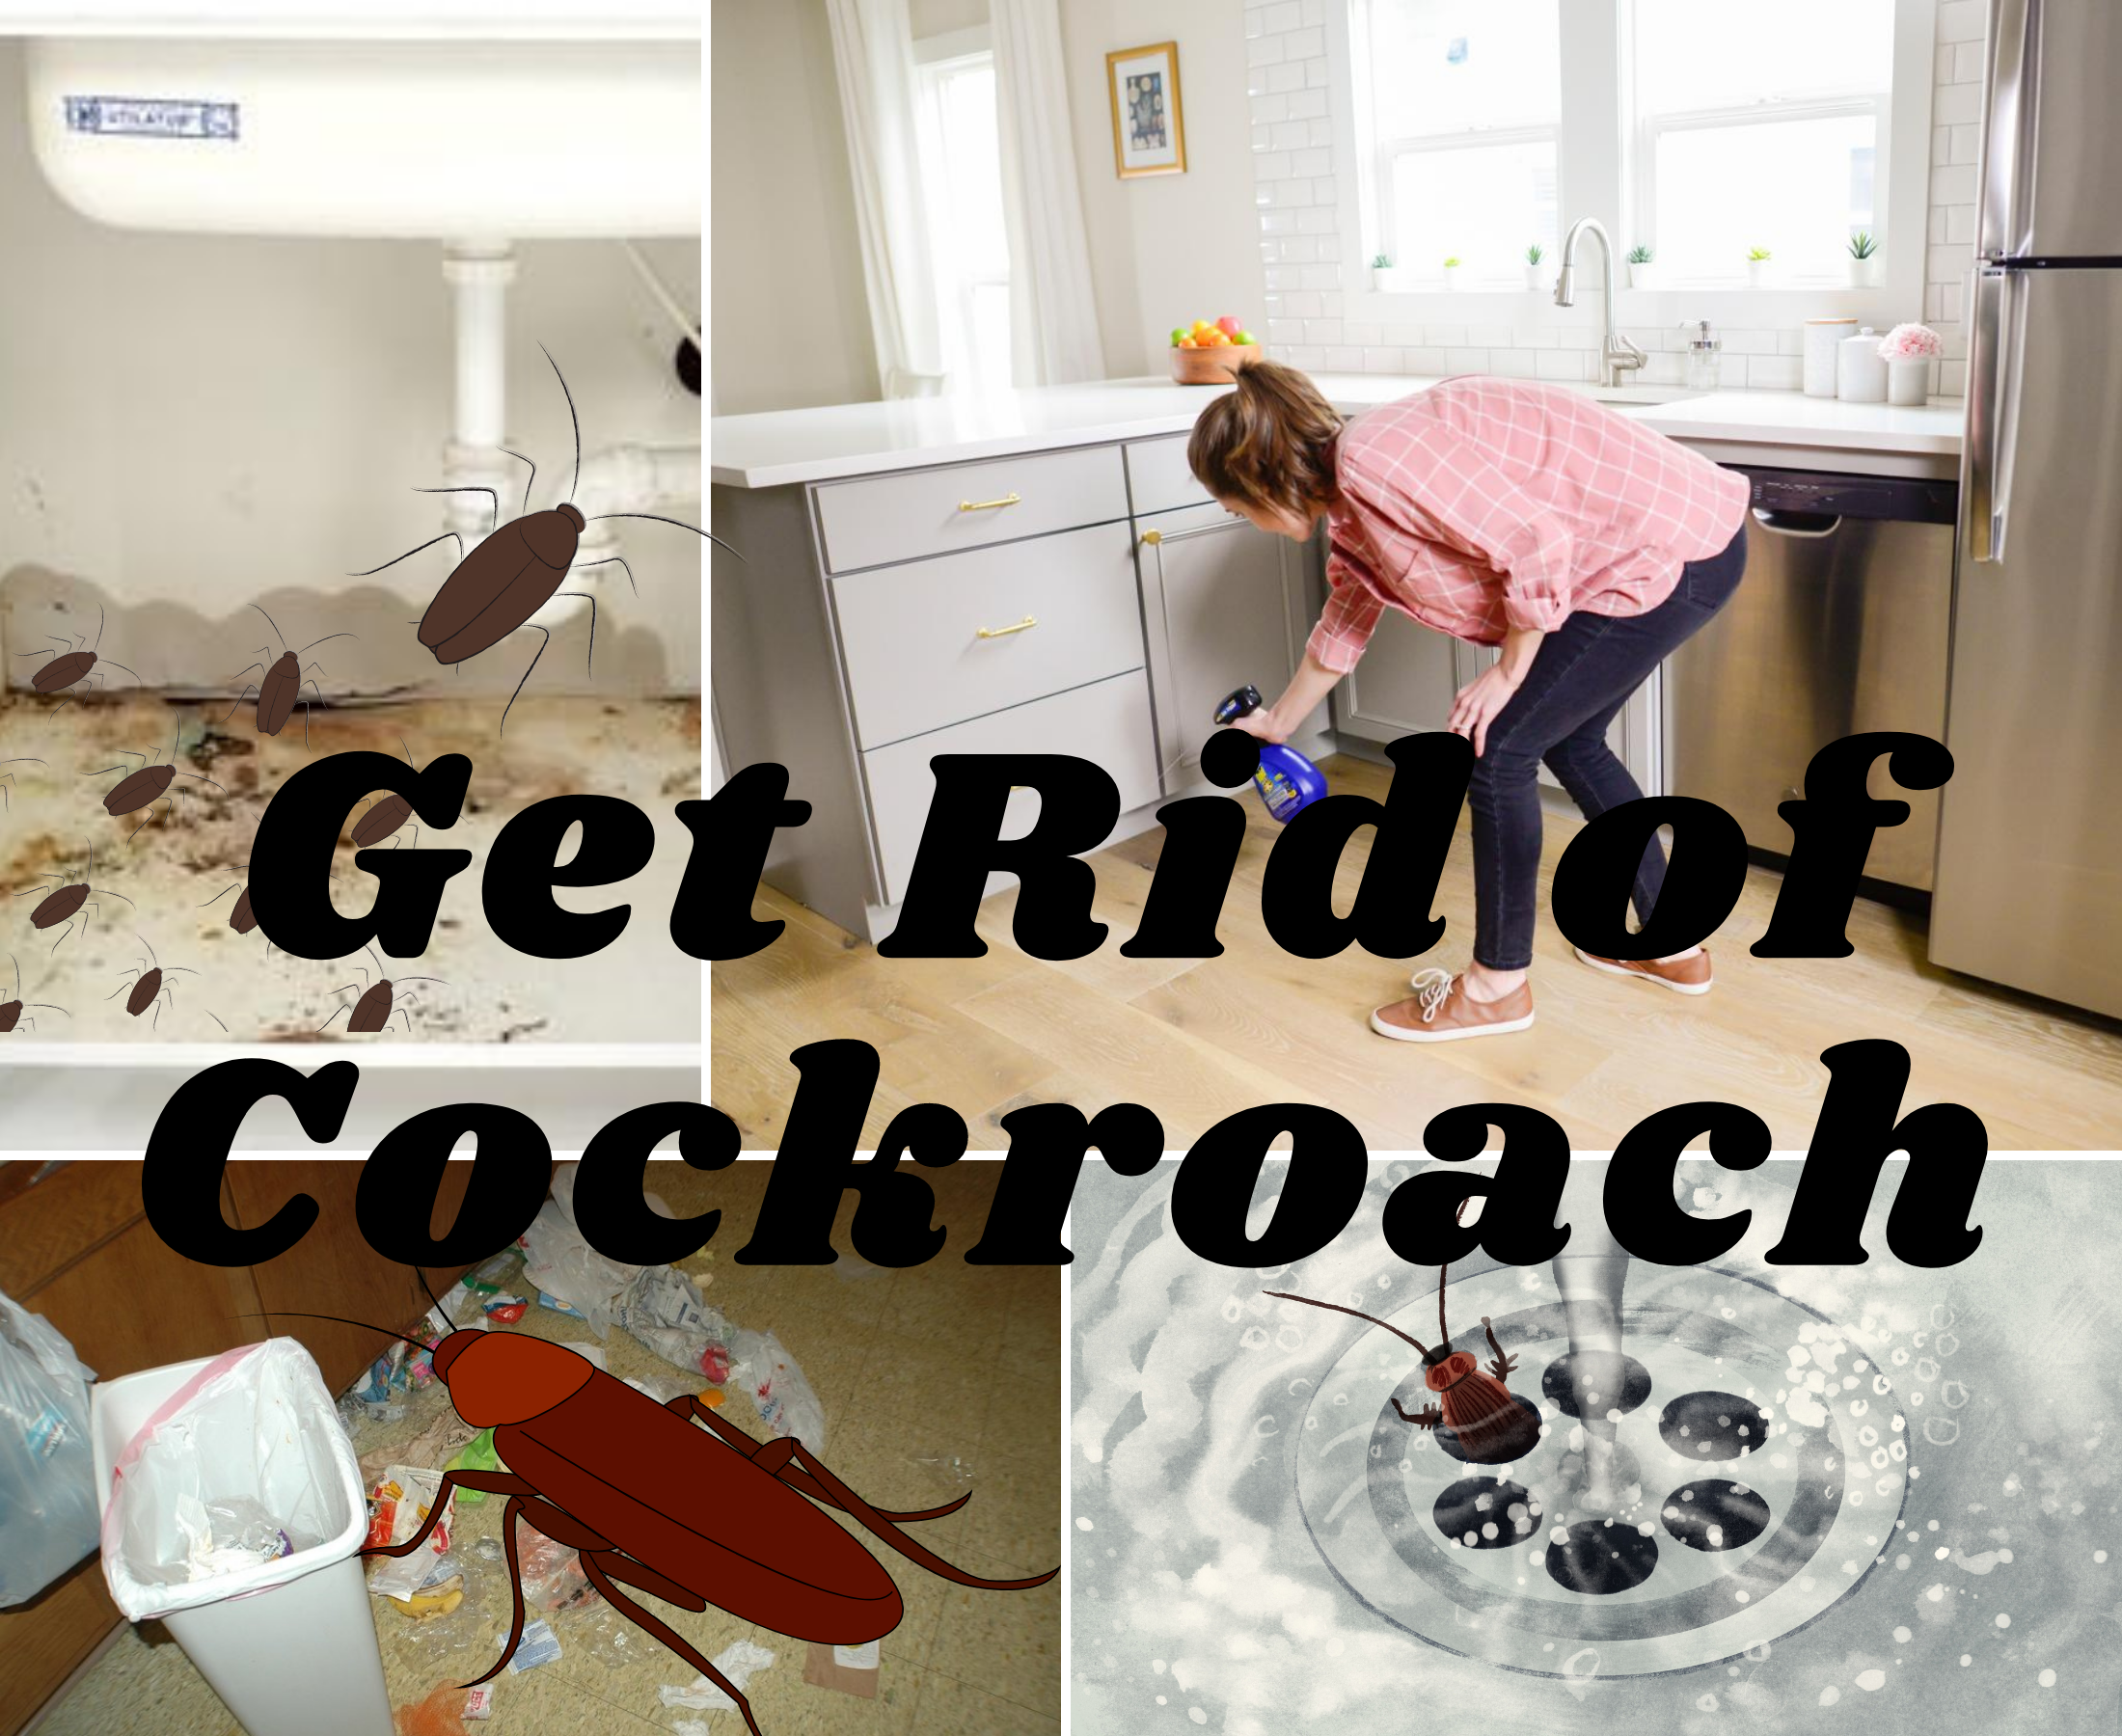 Is cleaning your kitchen enough to get rid of cockroaches?